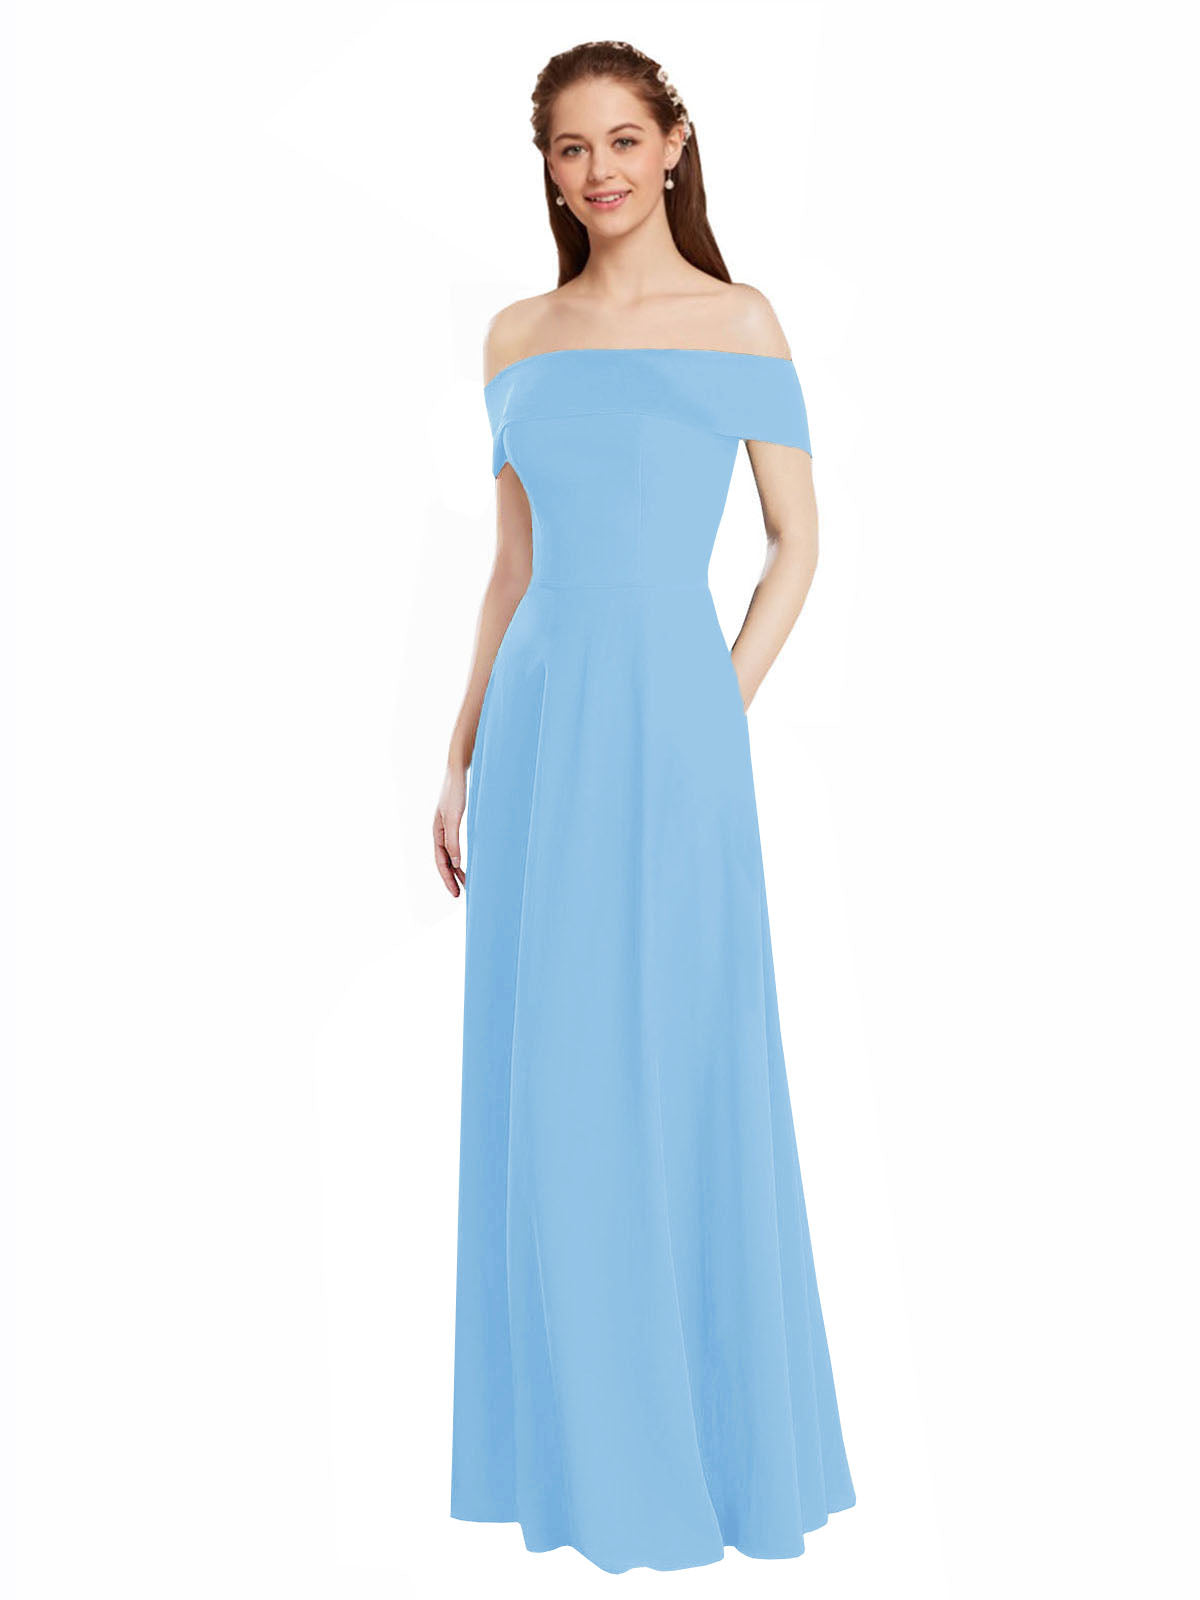 Periwinkle A-Line Off the Shoulder Cap Sleeves Long Bridesmaid Dress Lina